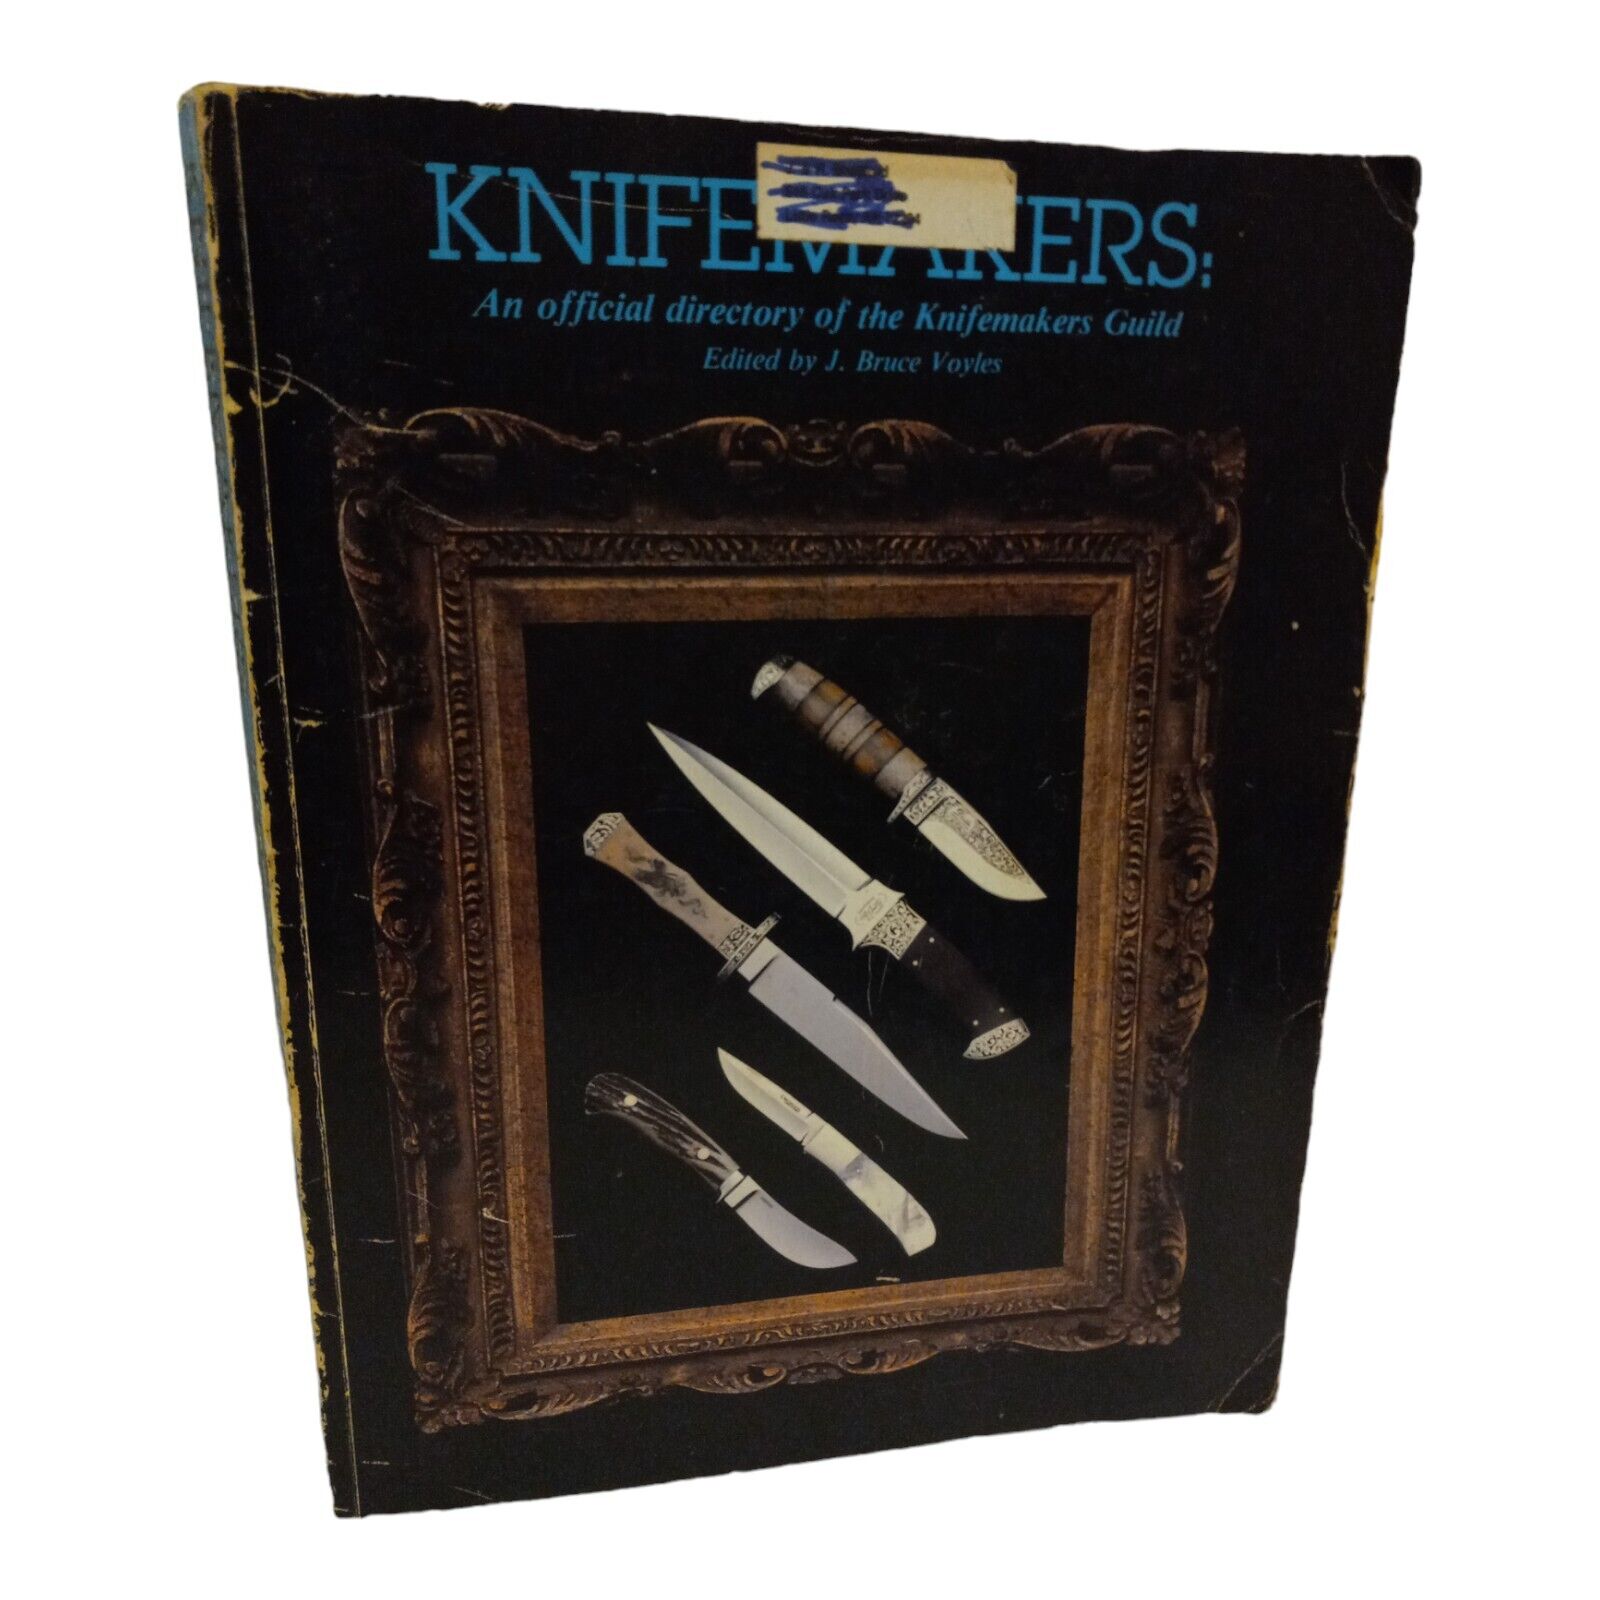 Knifemakers: An Official Directory of the Knifemakers Guild 1984